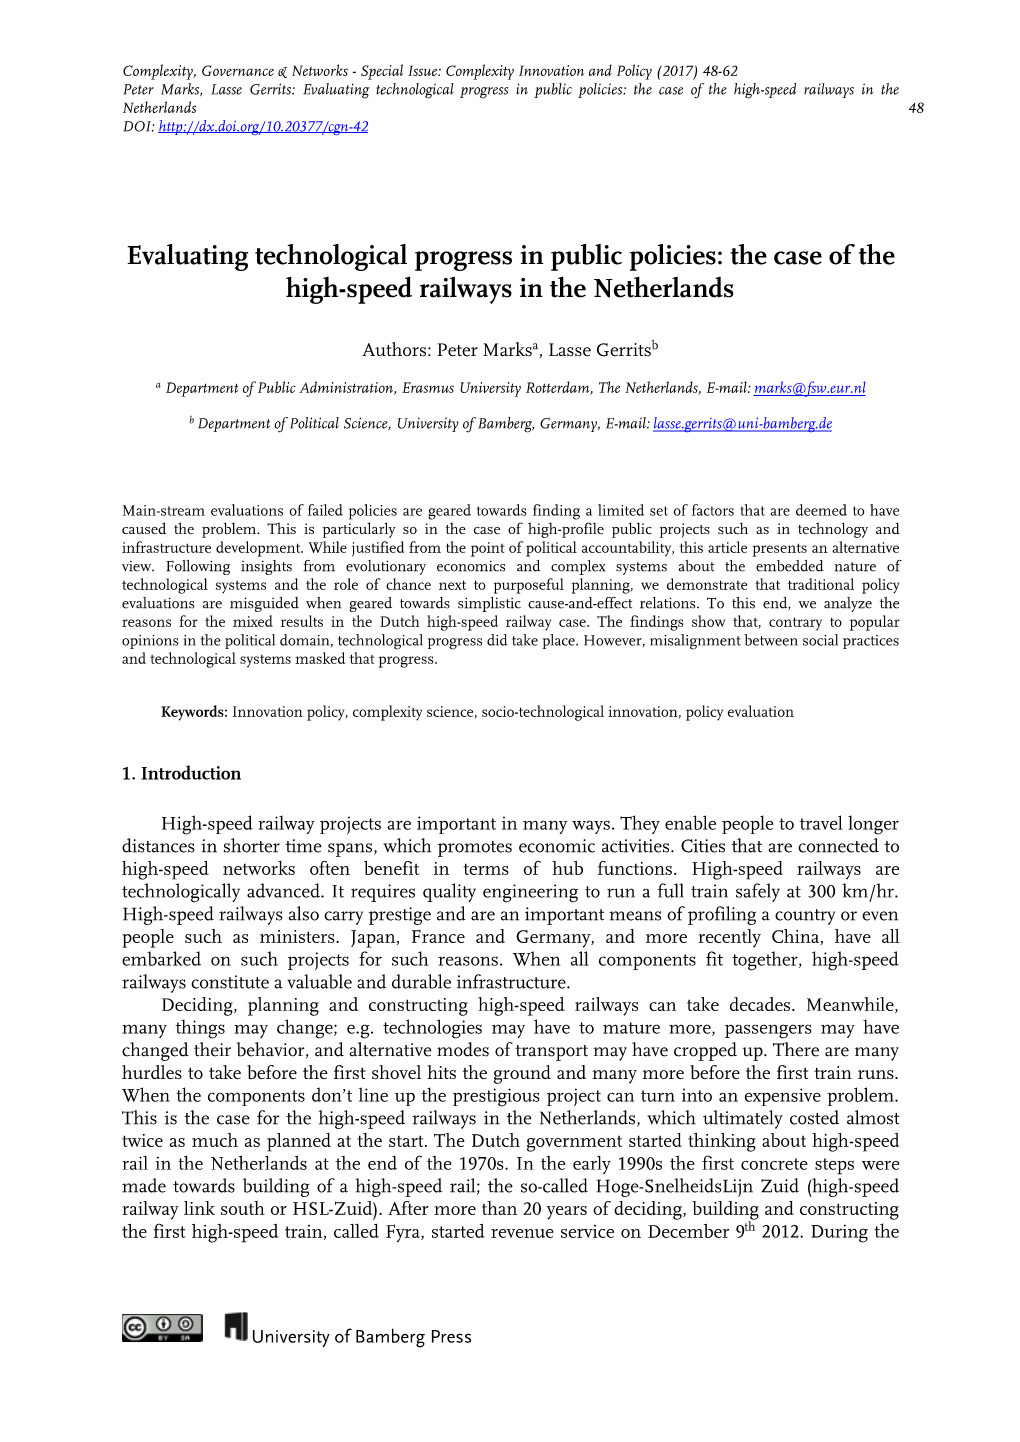 Evaluating Technological Progress in Public Policies: the Case of the High-Speed Railways in the Netherlands